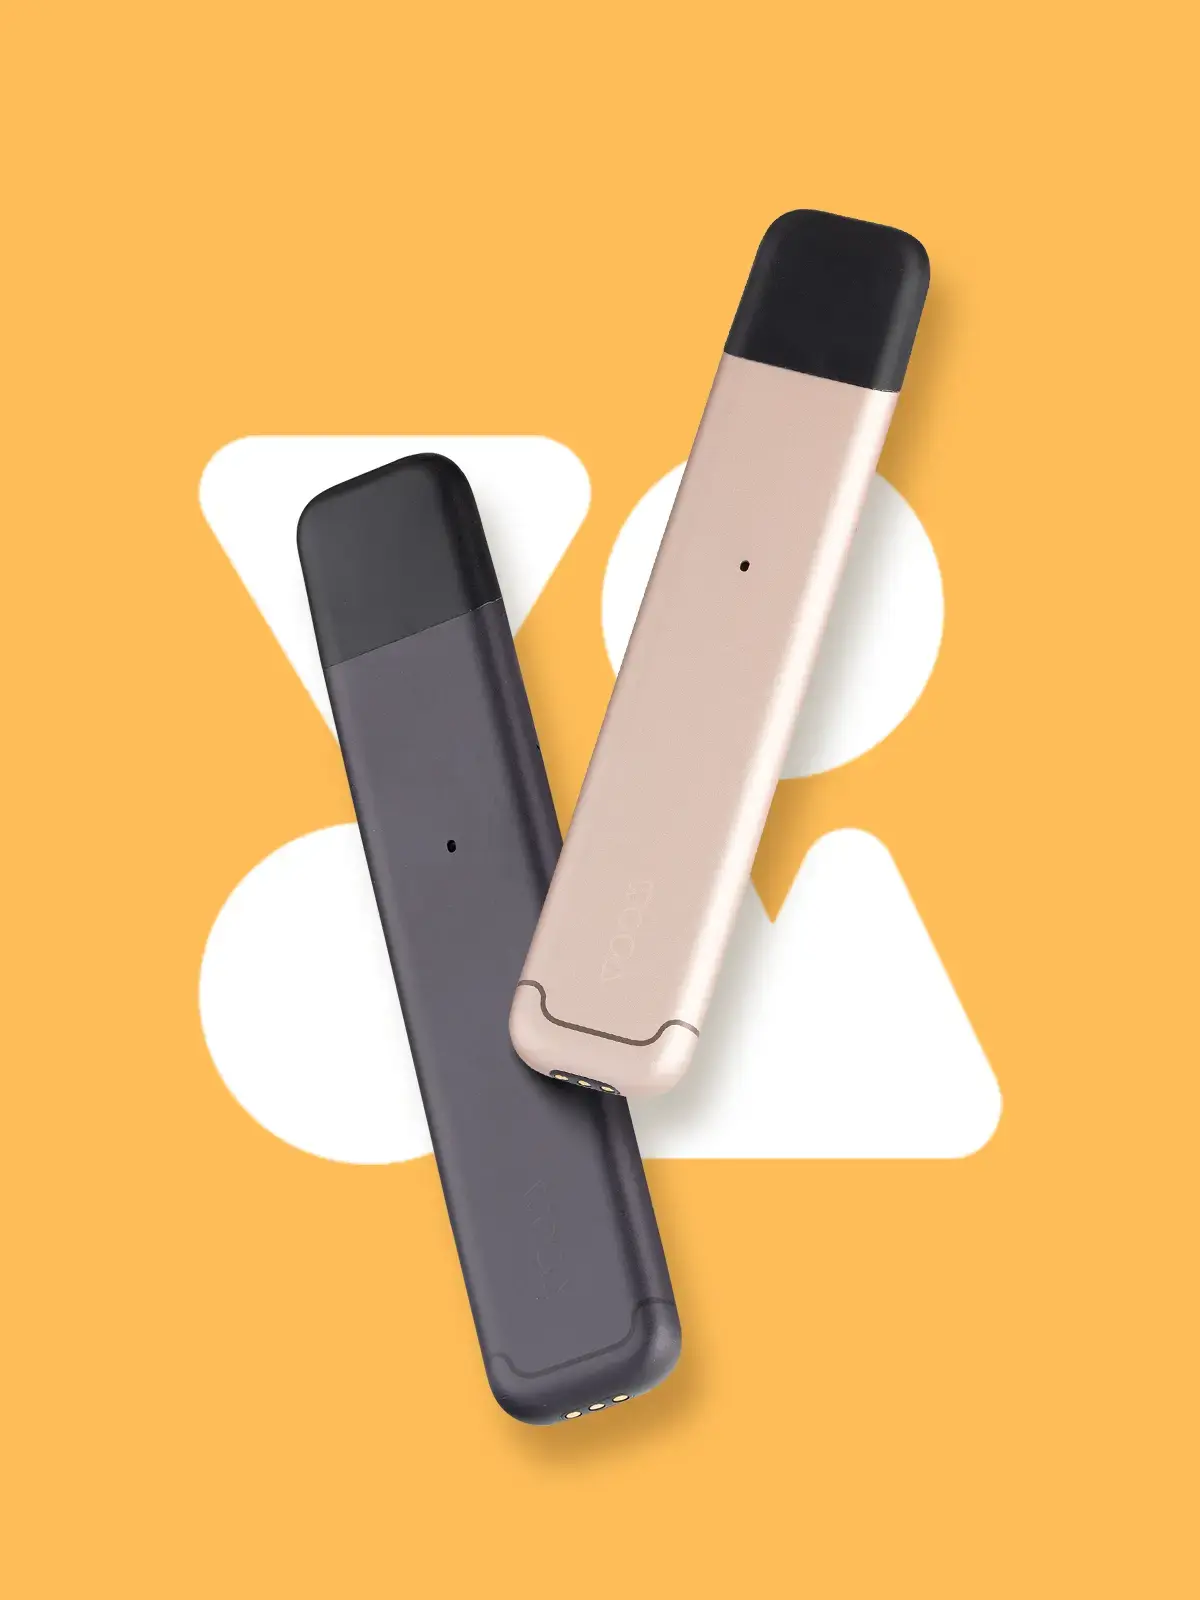 Two Voom devices in Grey and Gold in front of a yellow background featuring the Voom logo